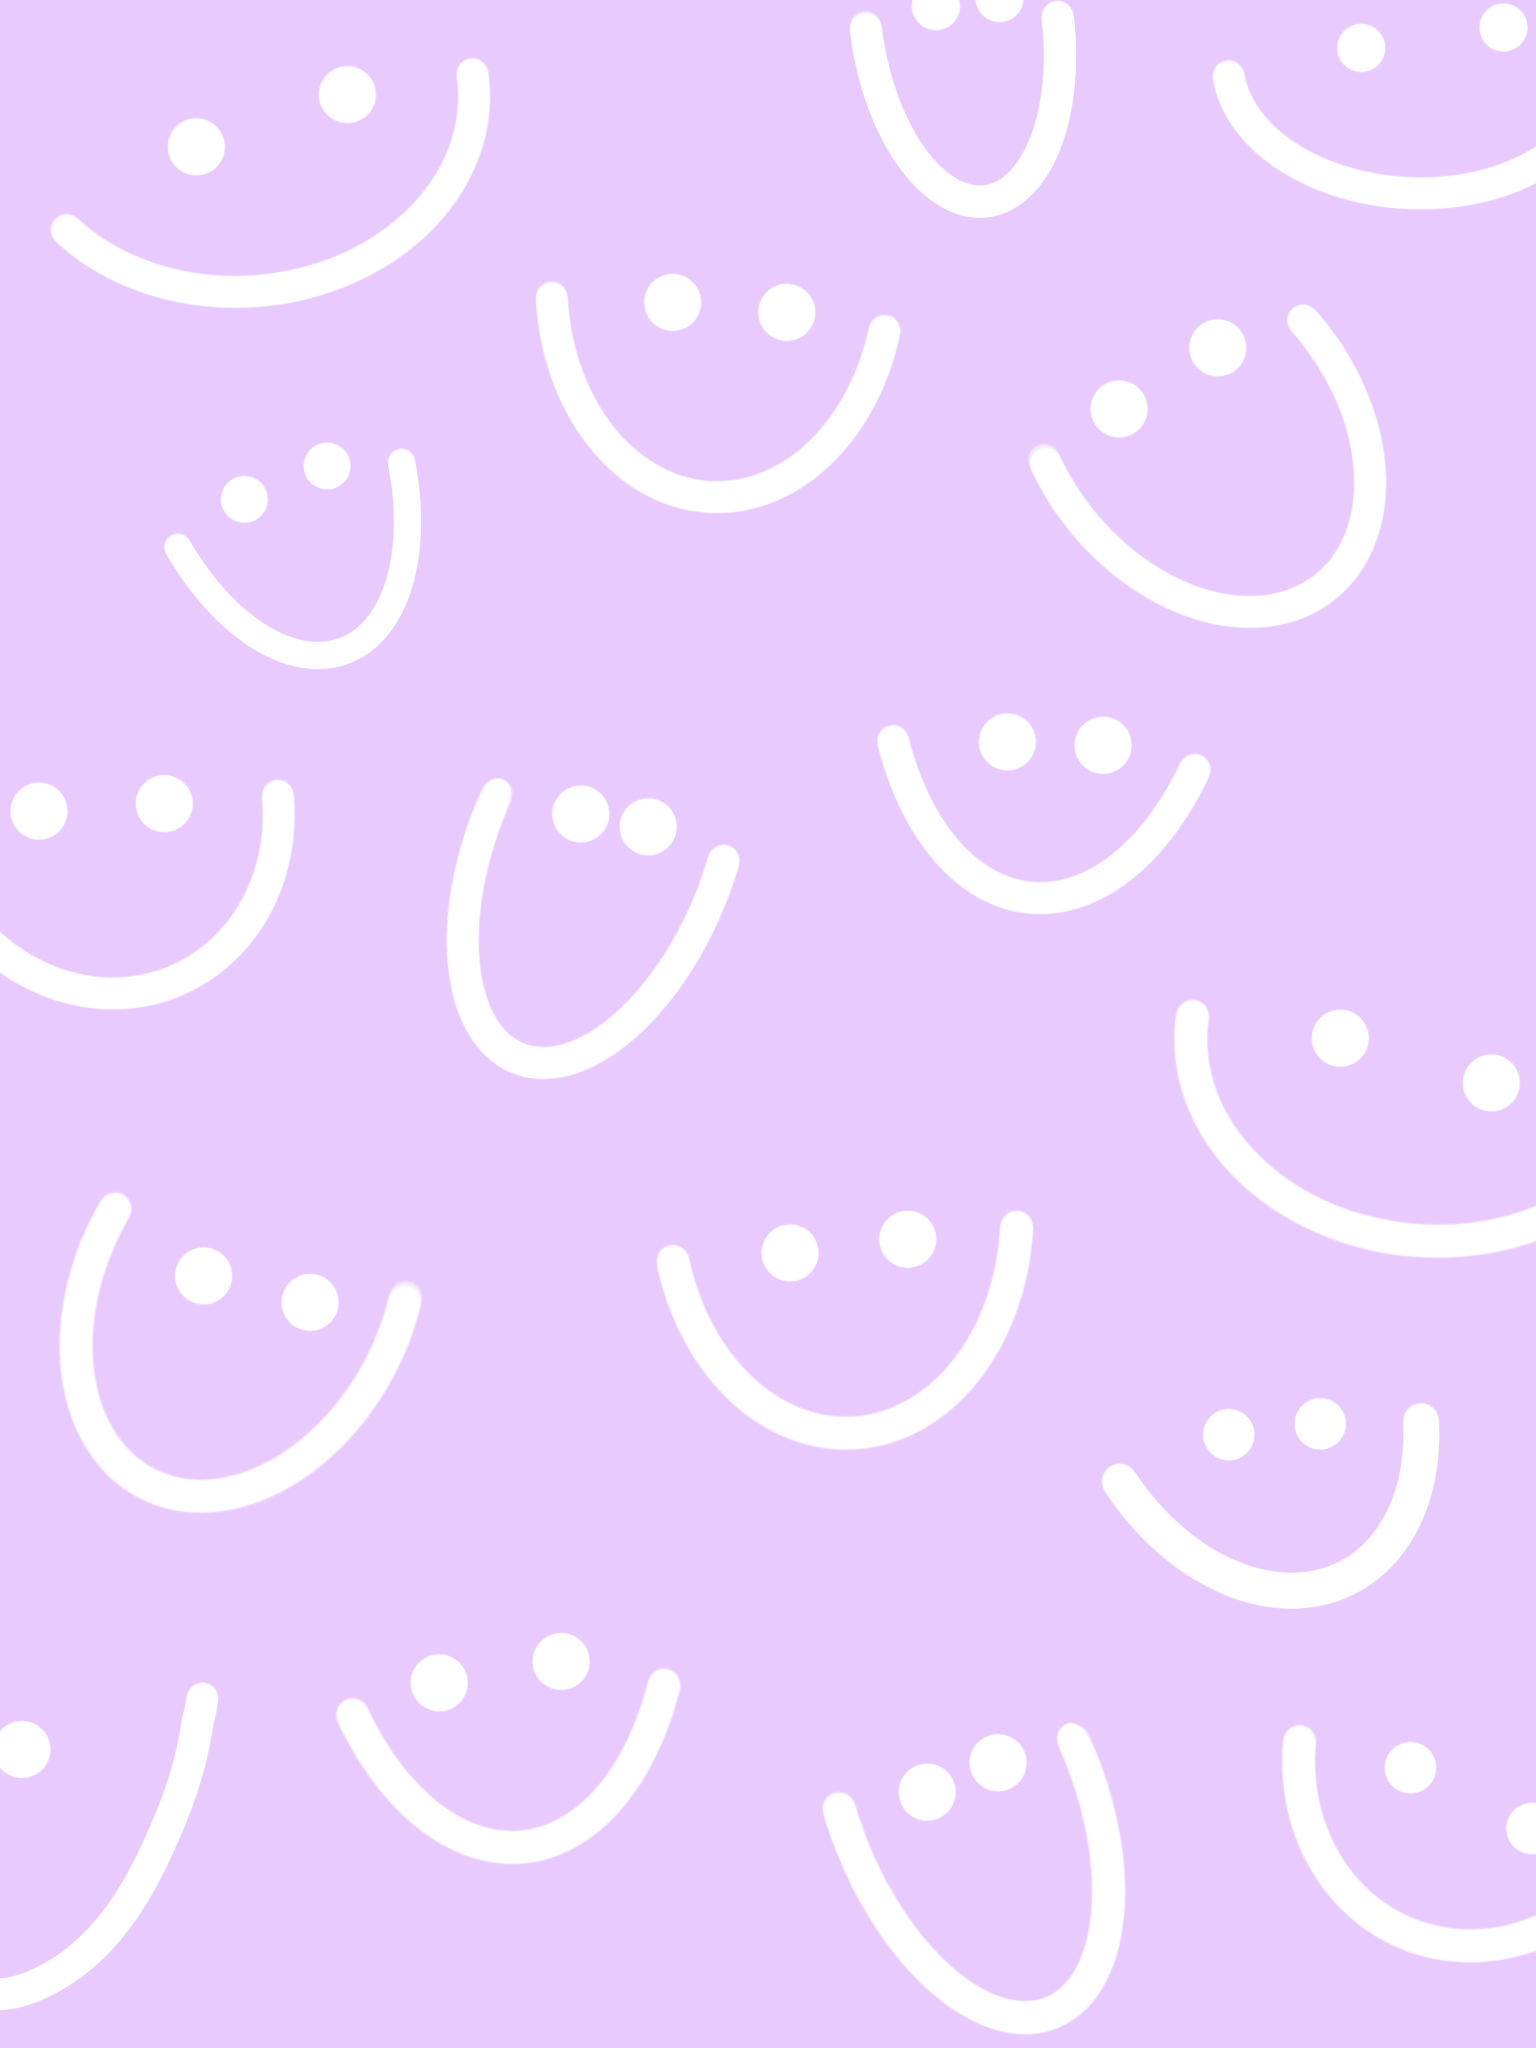 Smiley face wallpaper background